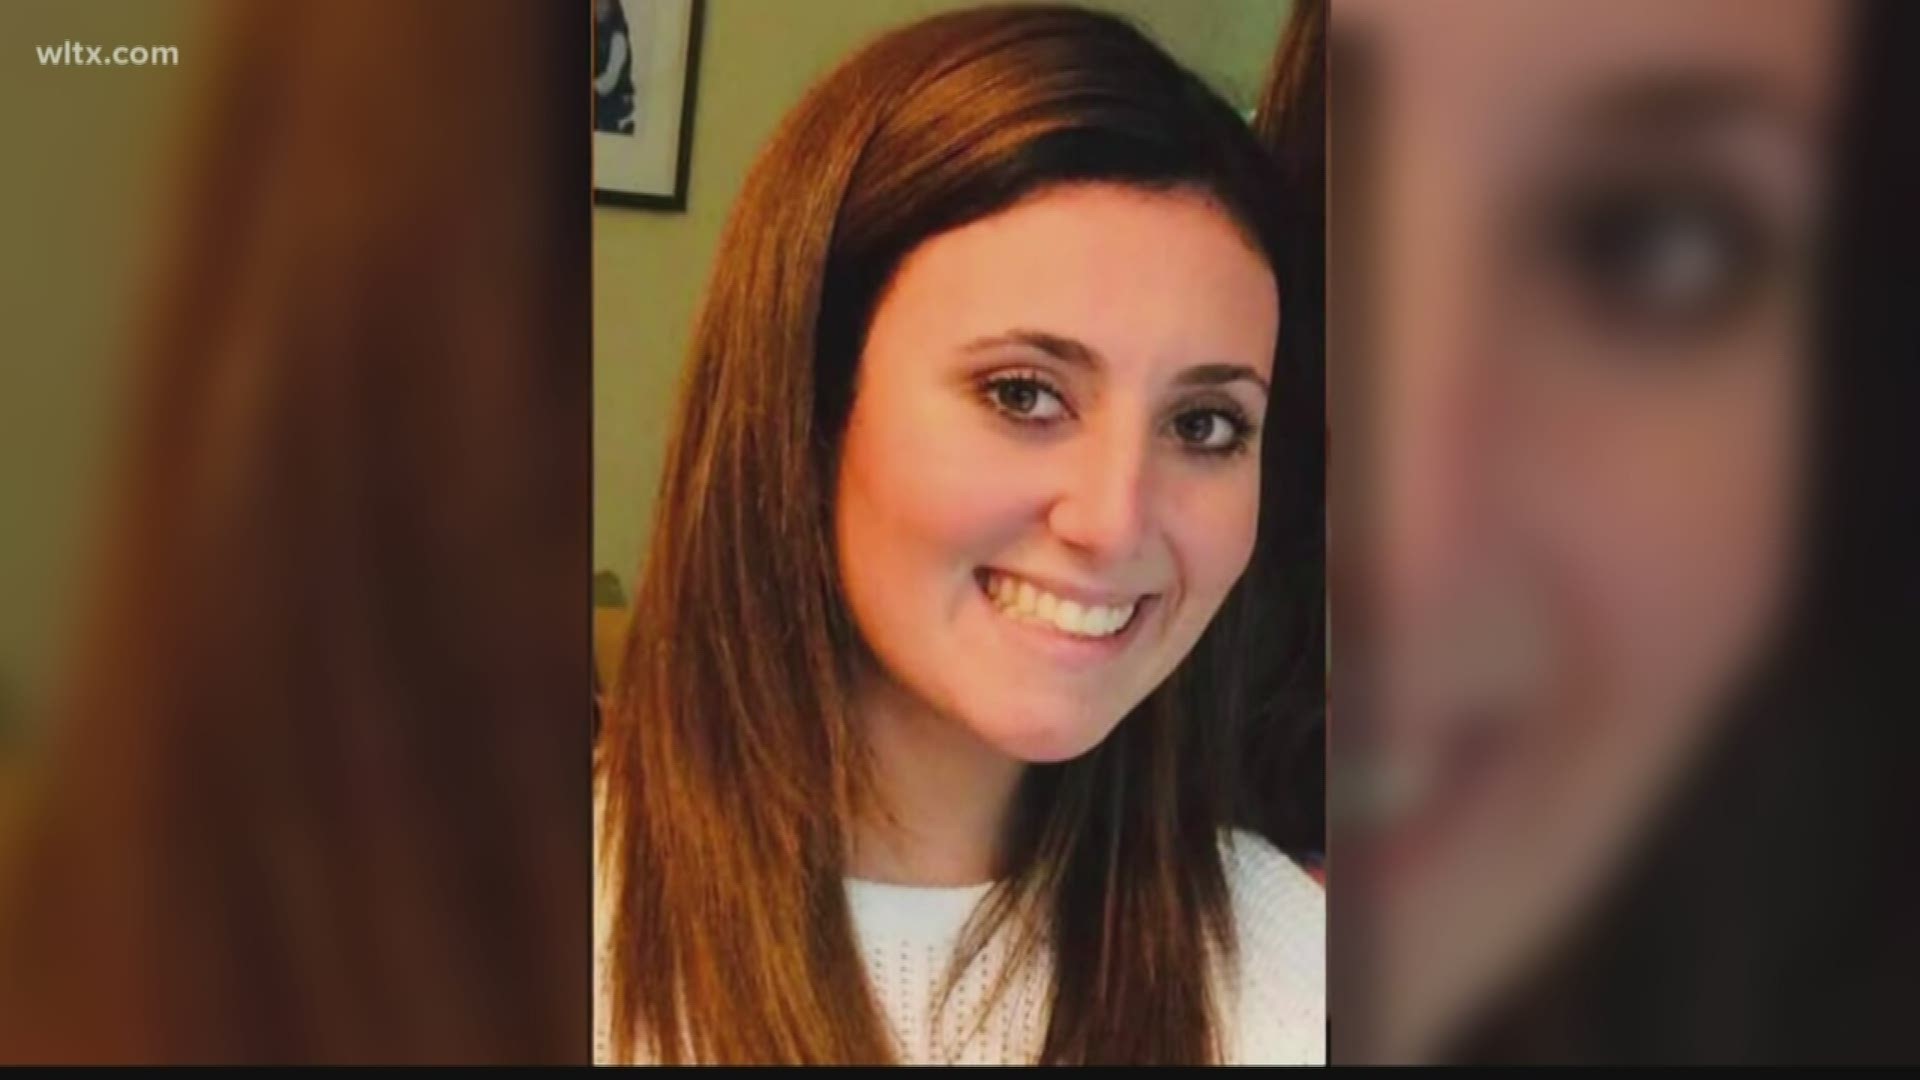 The City of Columbia released a 911 call by Samantha Josephson's roommate the day she went missing.